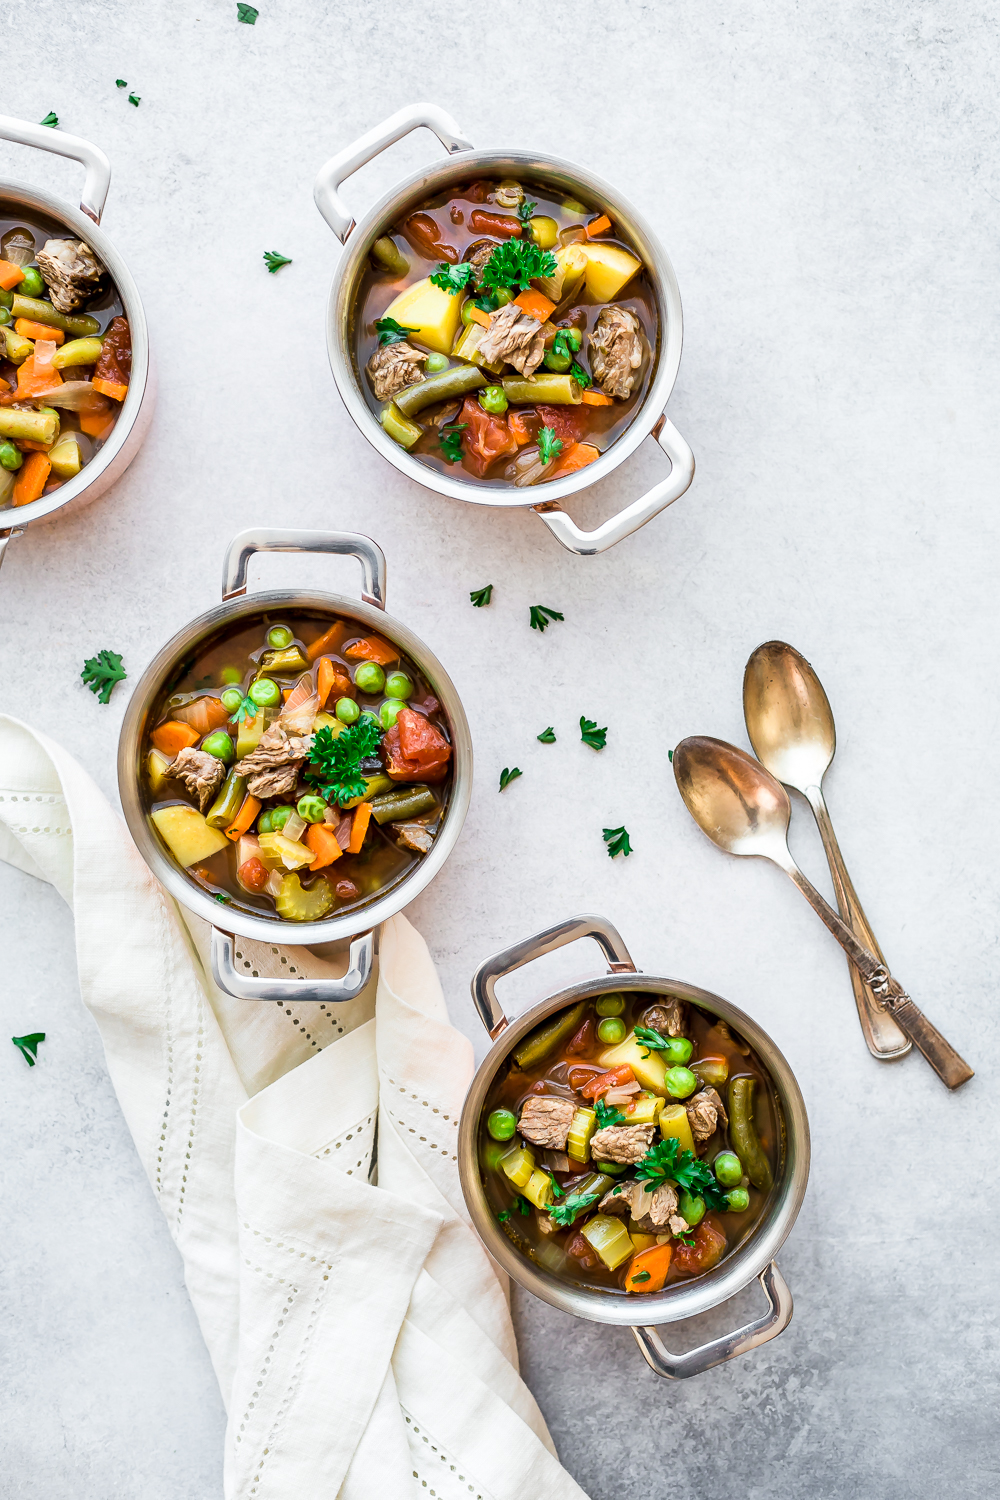 Cool Mom Eats weekly meal plan: Slow Cooker Beef and Vegetable Soup at Posh Journal